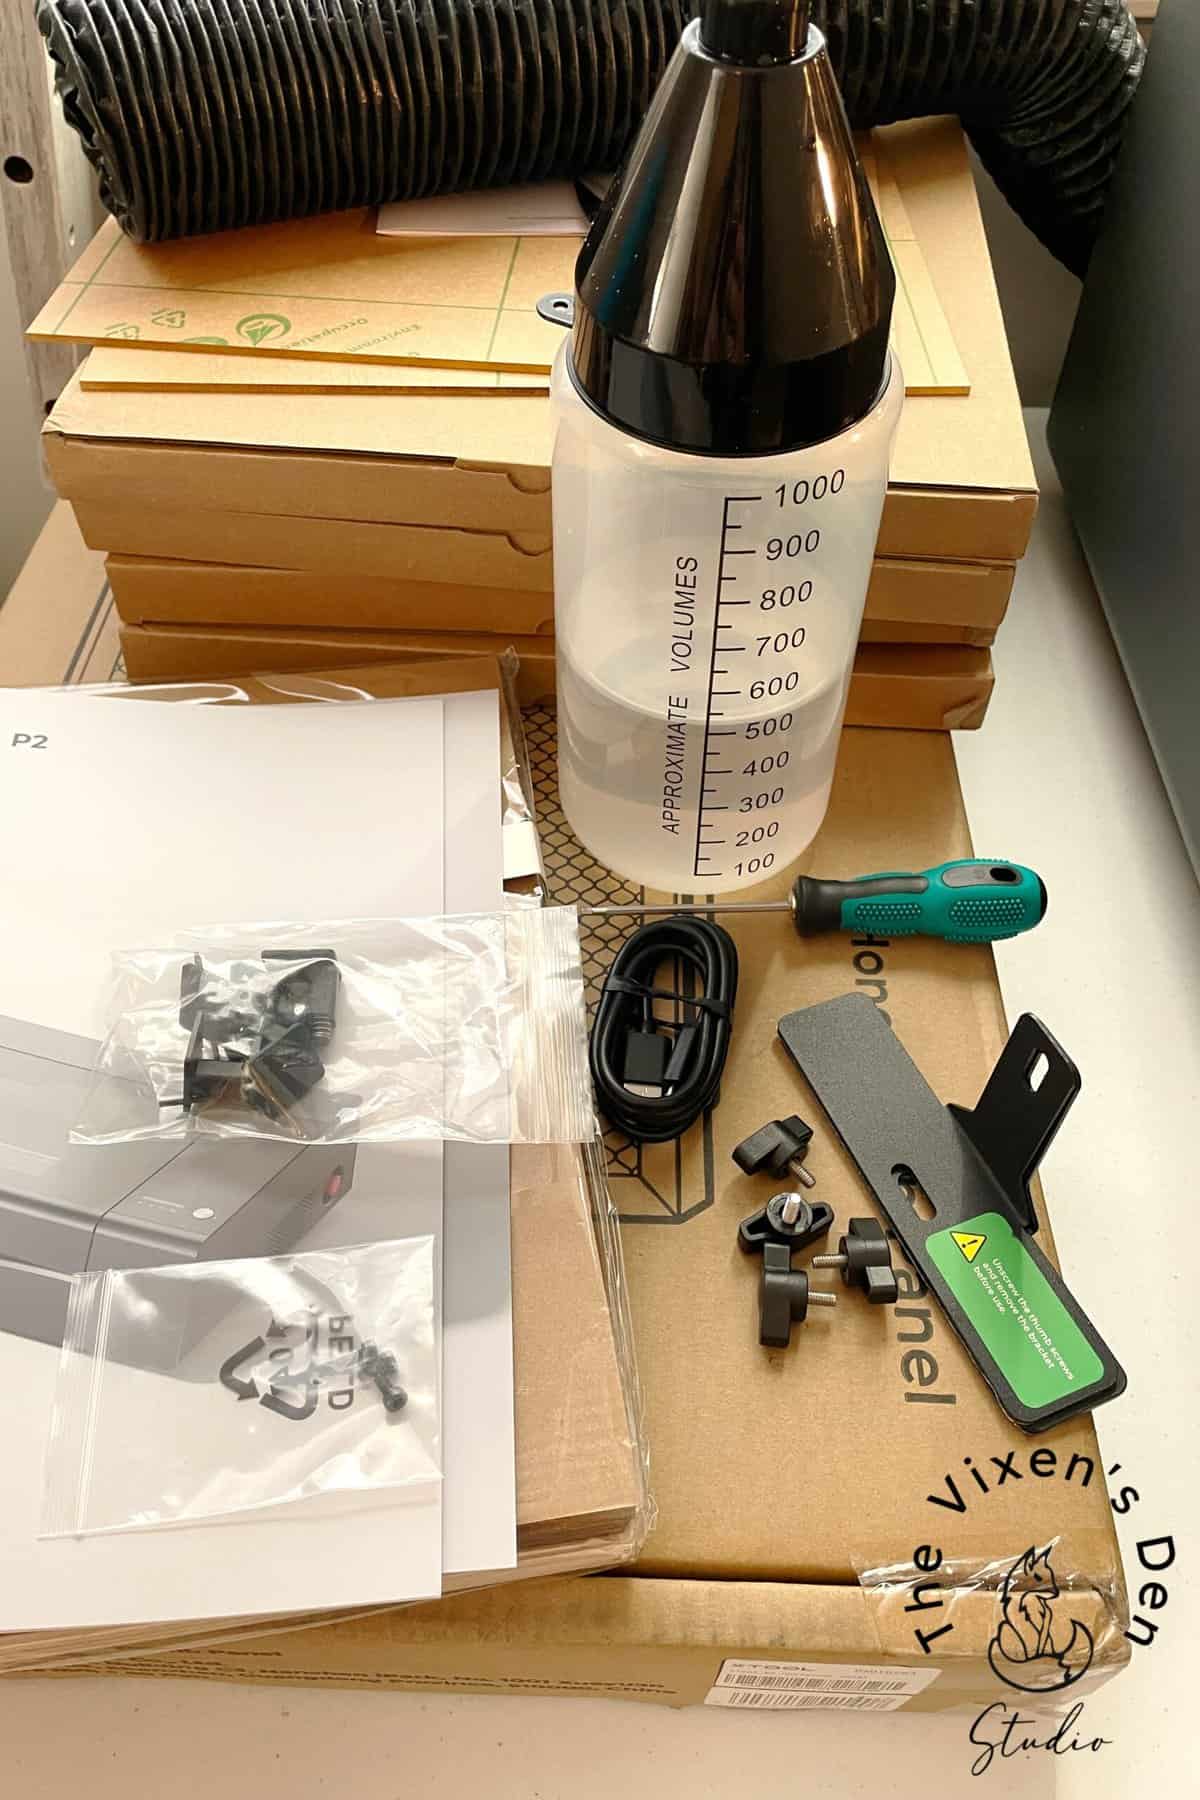 A box with a bottle and screwdriver.